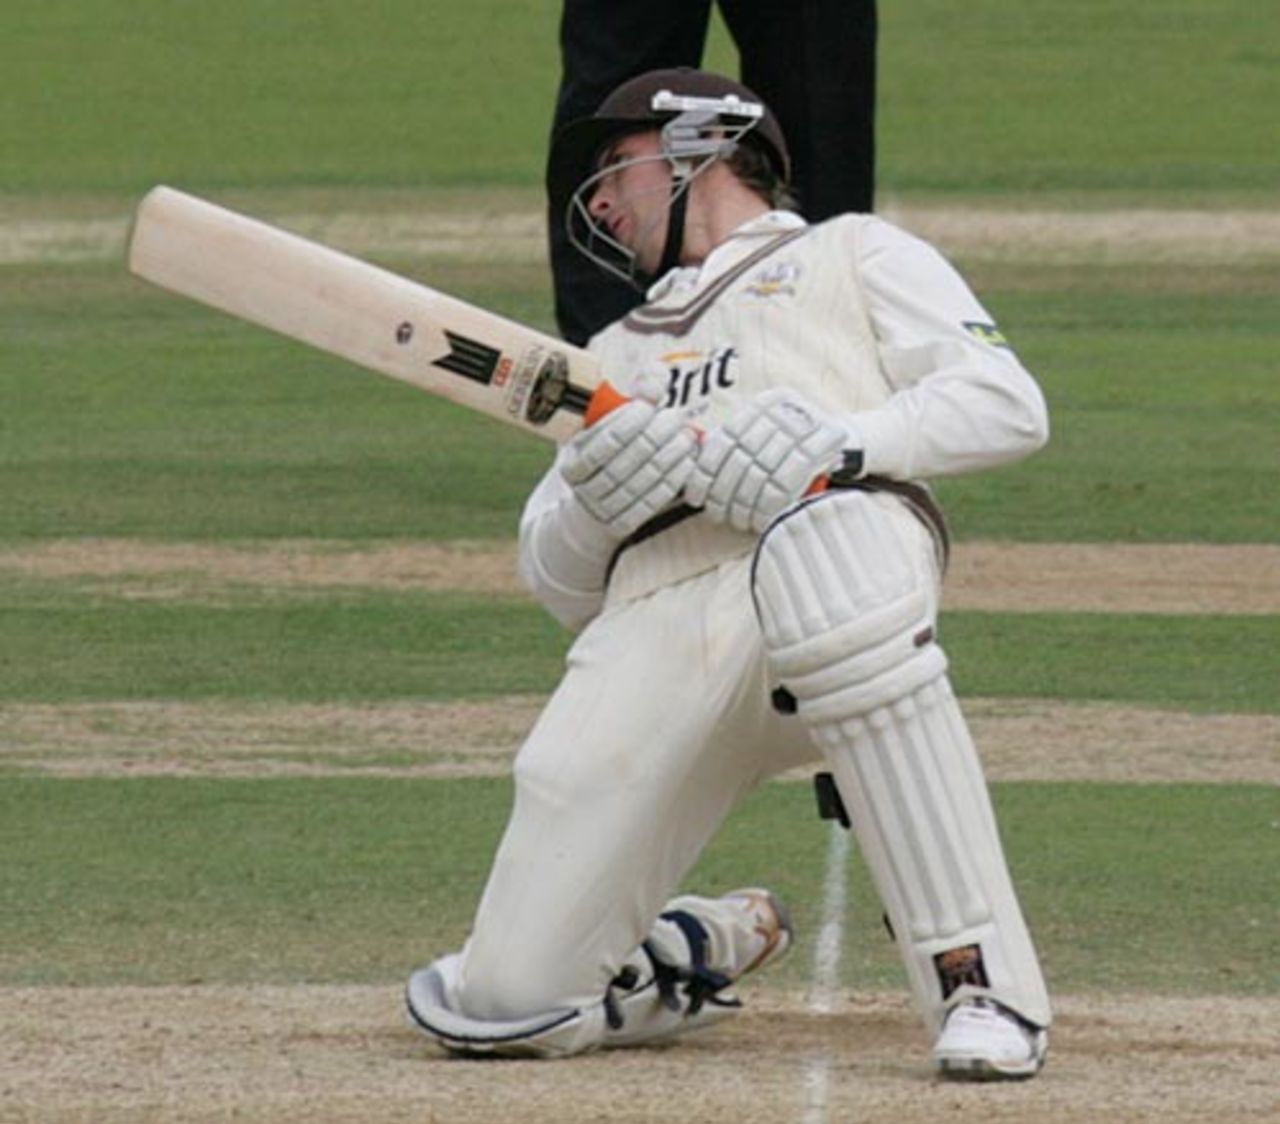 Stewart Walters evades a bouncer, Surrey v Lancashire, The Oval, September 21, 2997